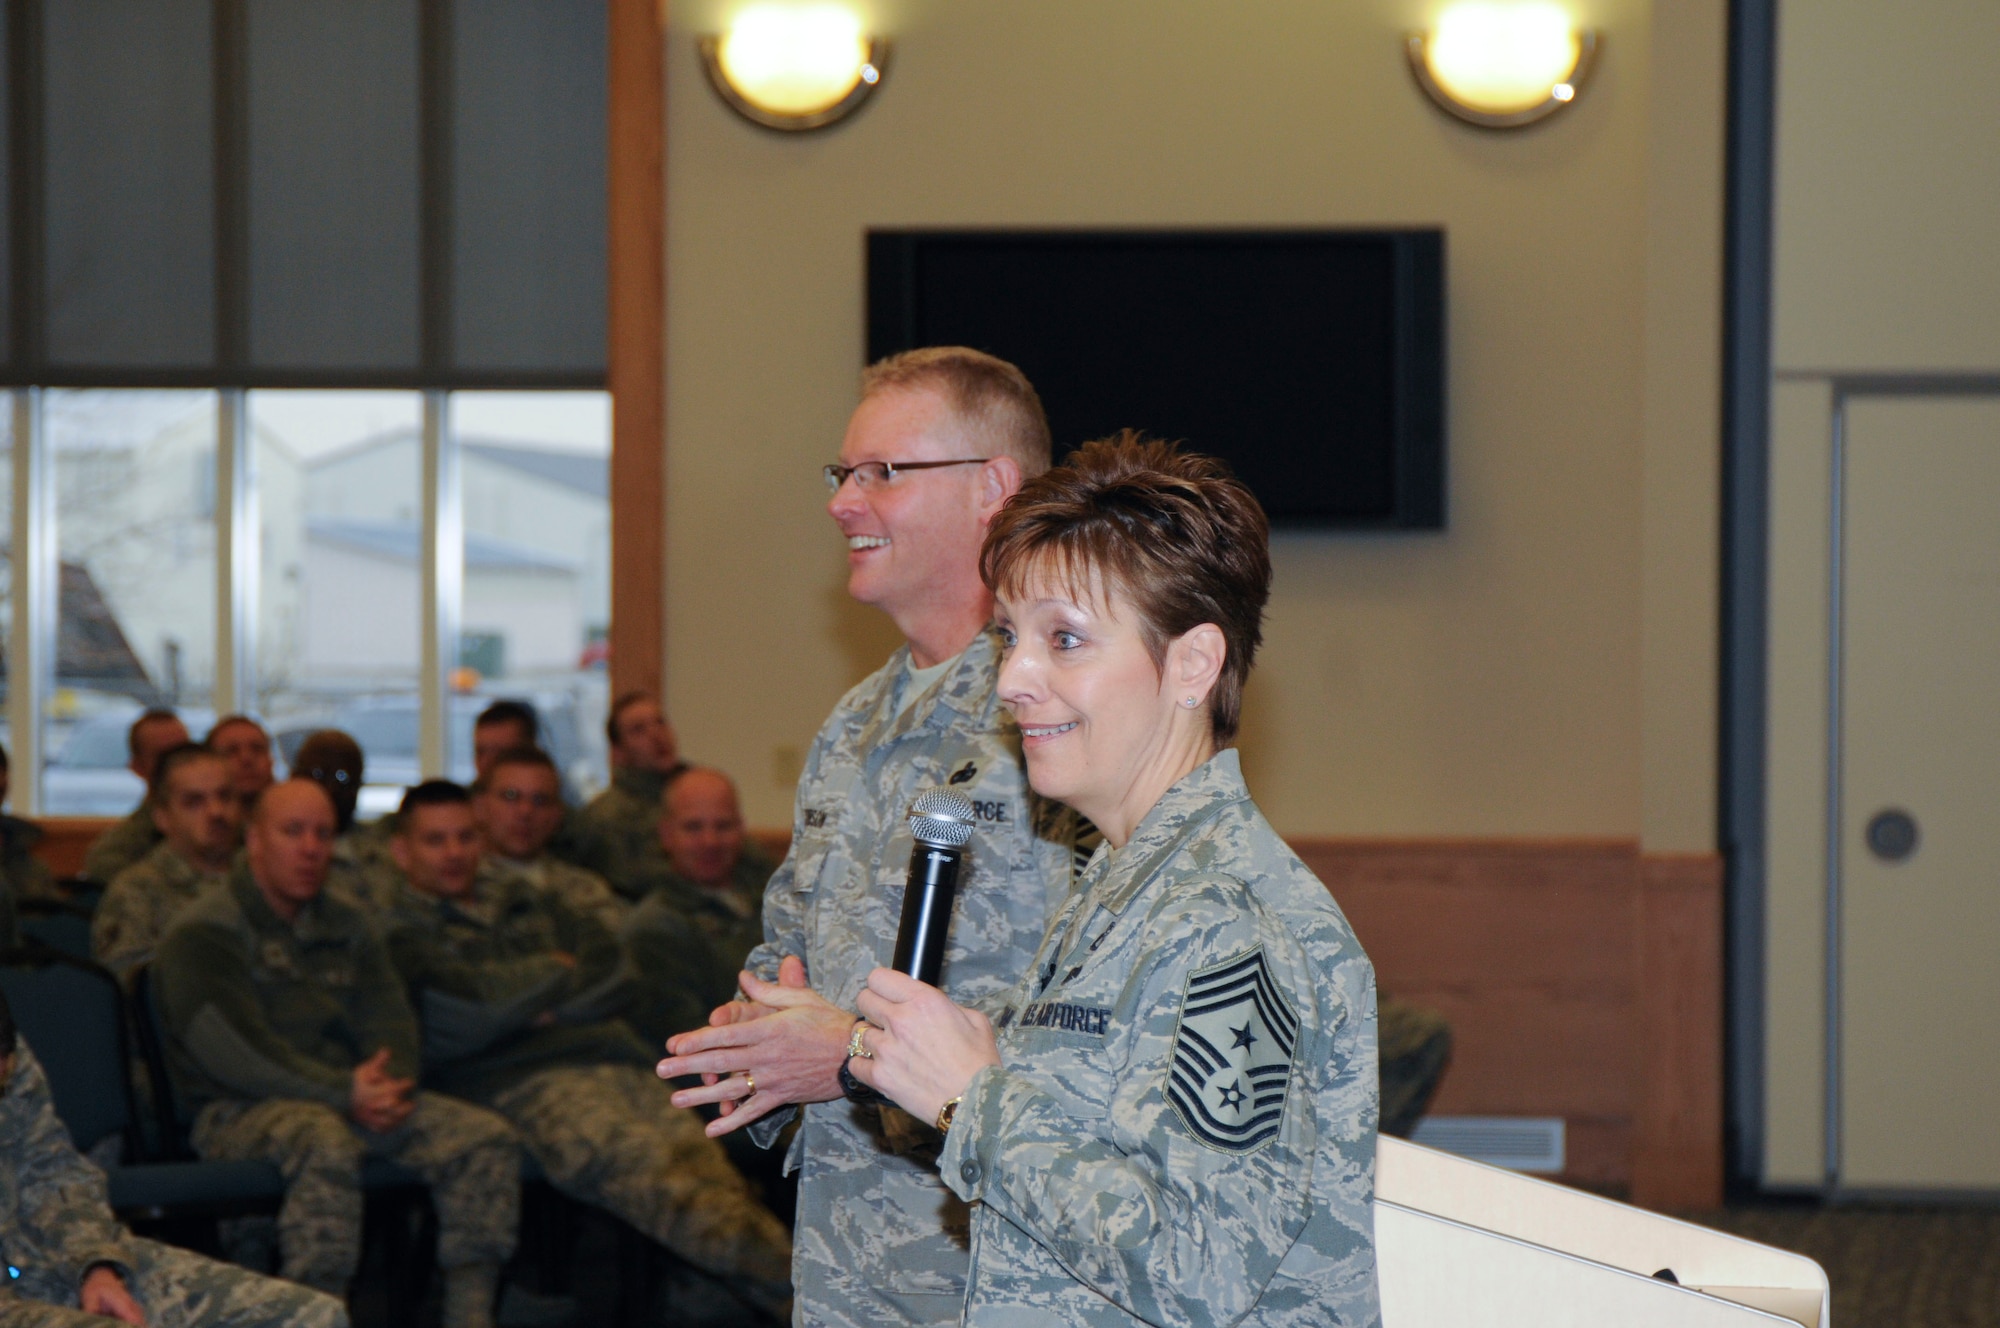 CMSgt. Denise Jelinski-Hall, senior enlisted leader of the National Guard Bureau, is joined by CMSgt. Robert Dobson, command chief of the 127th Wing, during a town hall meeting Feb. 4, 2012, at Selfridge Air National Guard Base, Mich. Jelinski-Hall visited Selfridge part of a tour of several Michigan National Guard facilities. At each stop, she spoke to Airmen and Soldiers and sought their input on issues to take back to the senior leaders of the Guard. (U.S. Air Force photo by TSgt. David Kujawa)